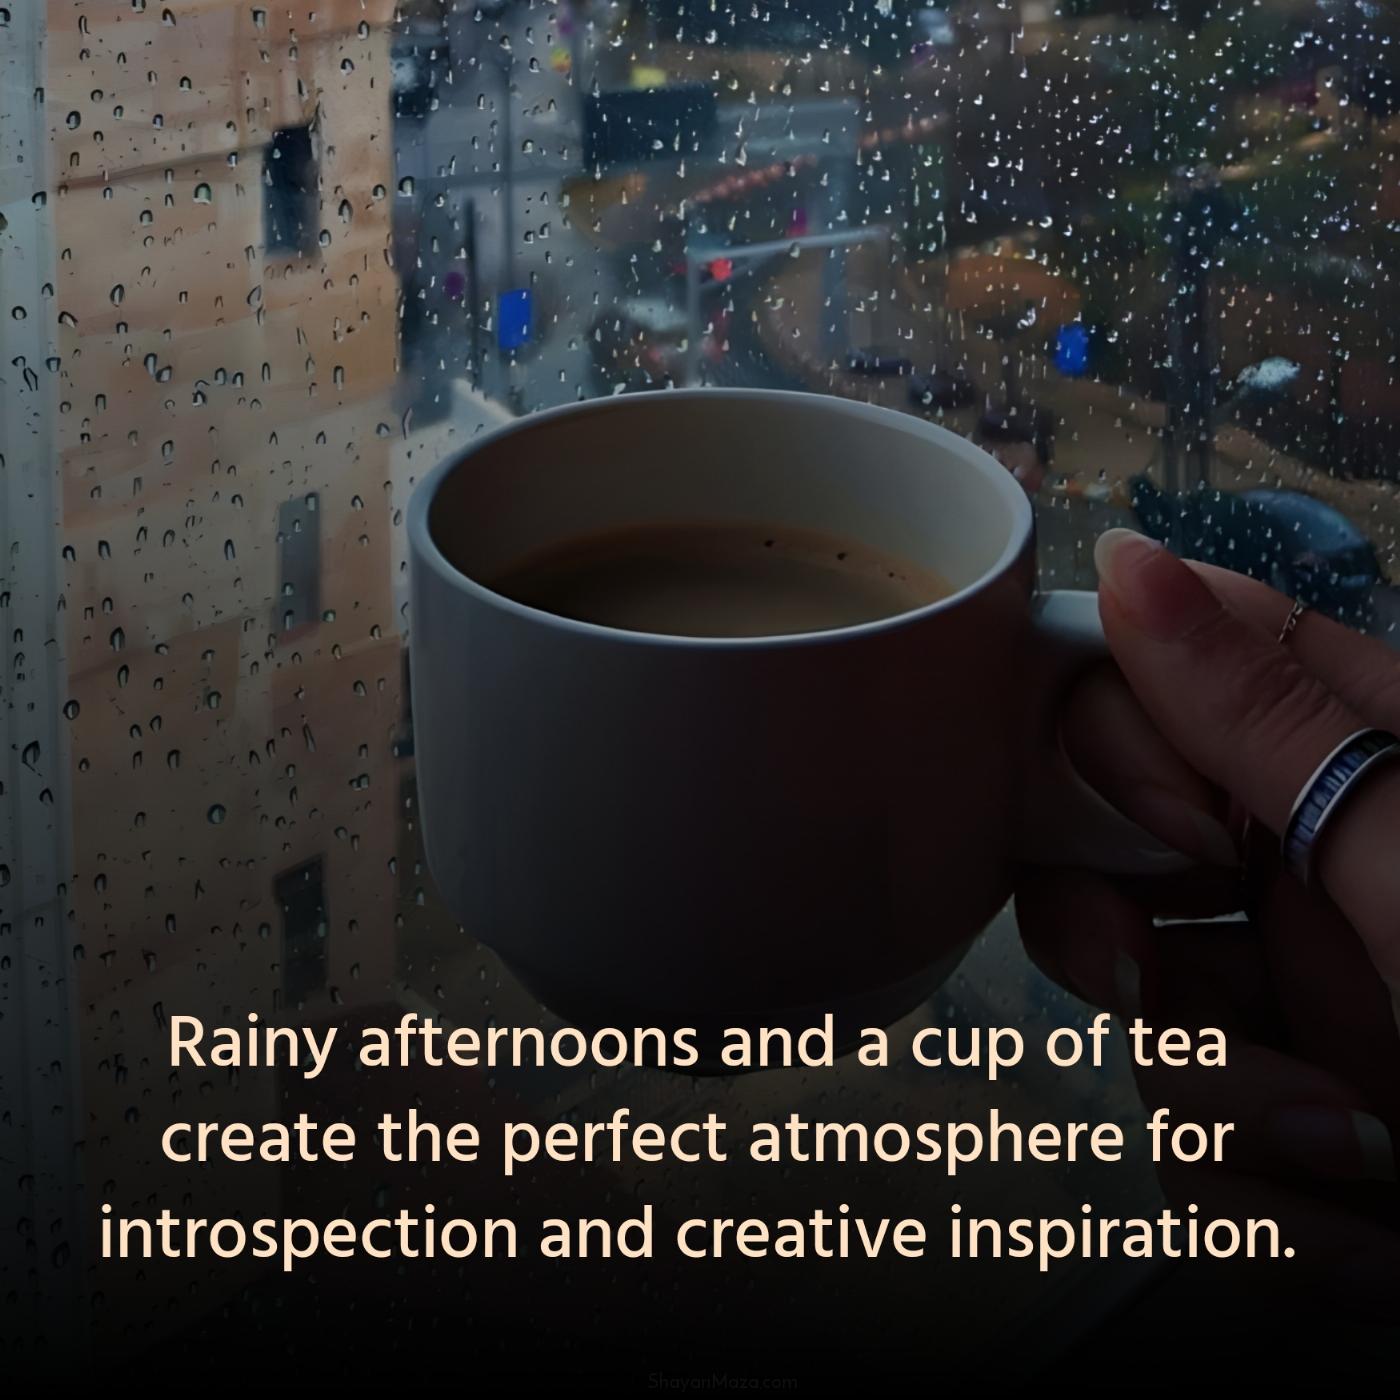 Rainy afternoons and a cup of tea create the perfect atmosphere